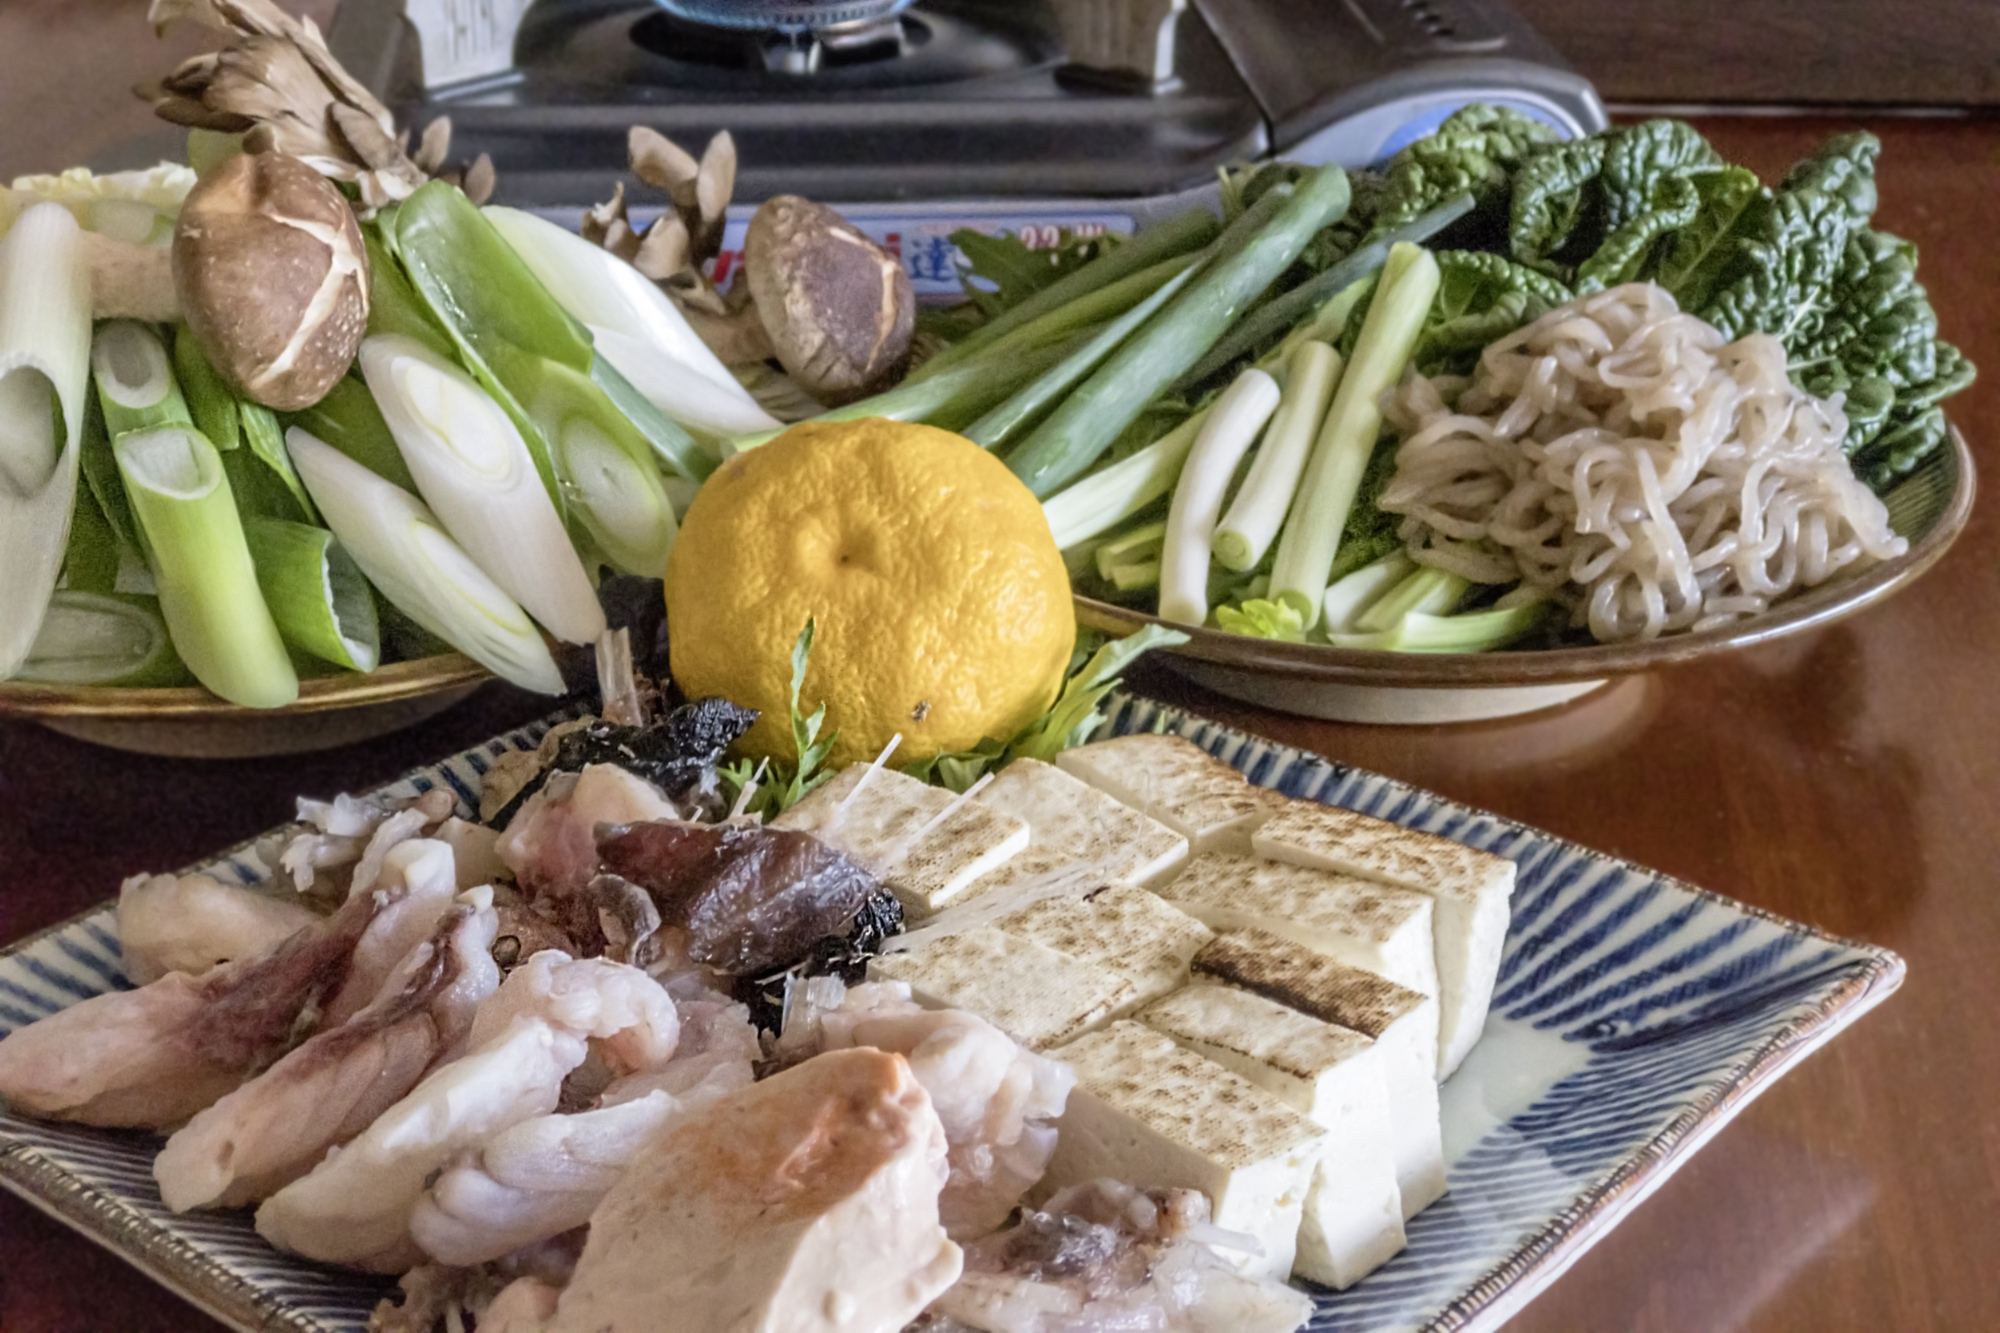 Chase away the winter blues with a comforting <I>nabe</I> hot pot